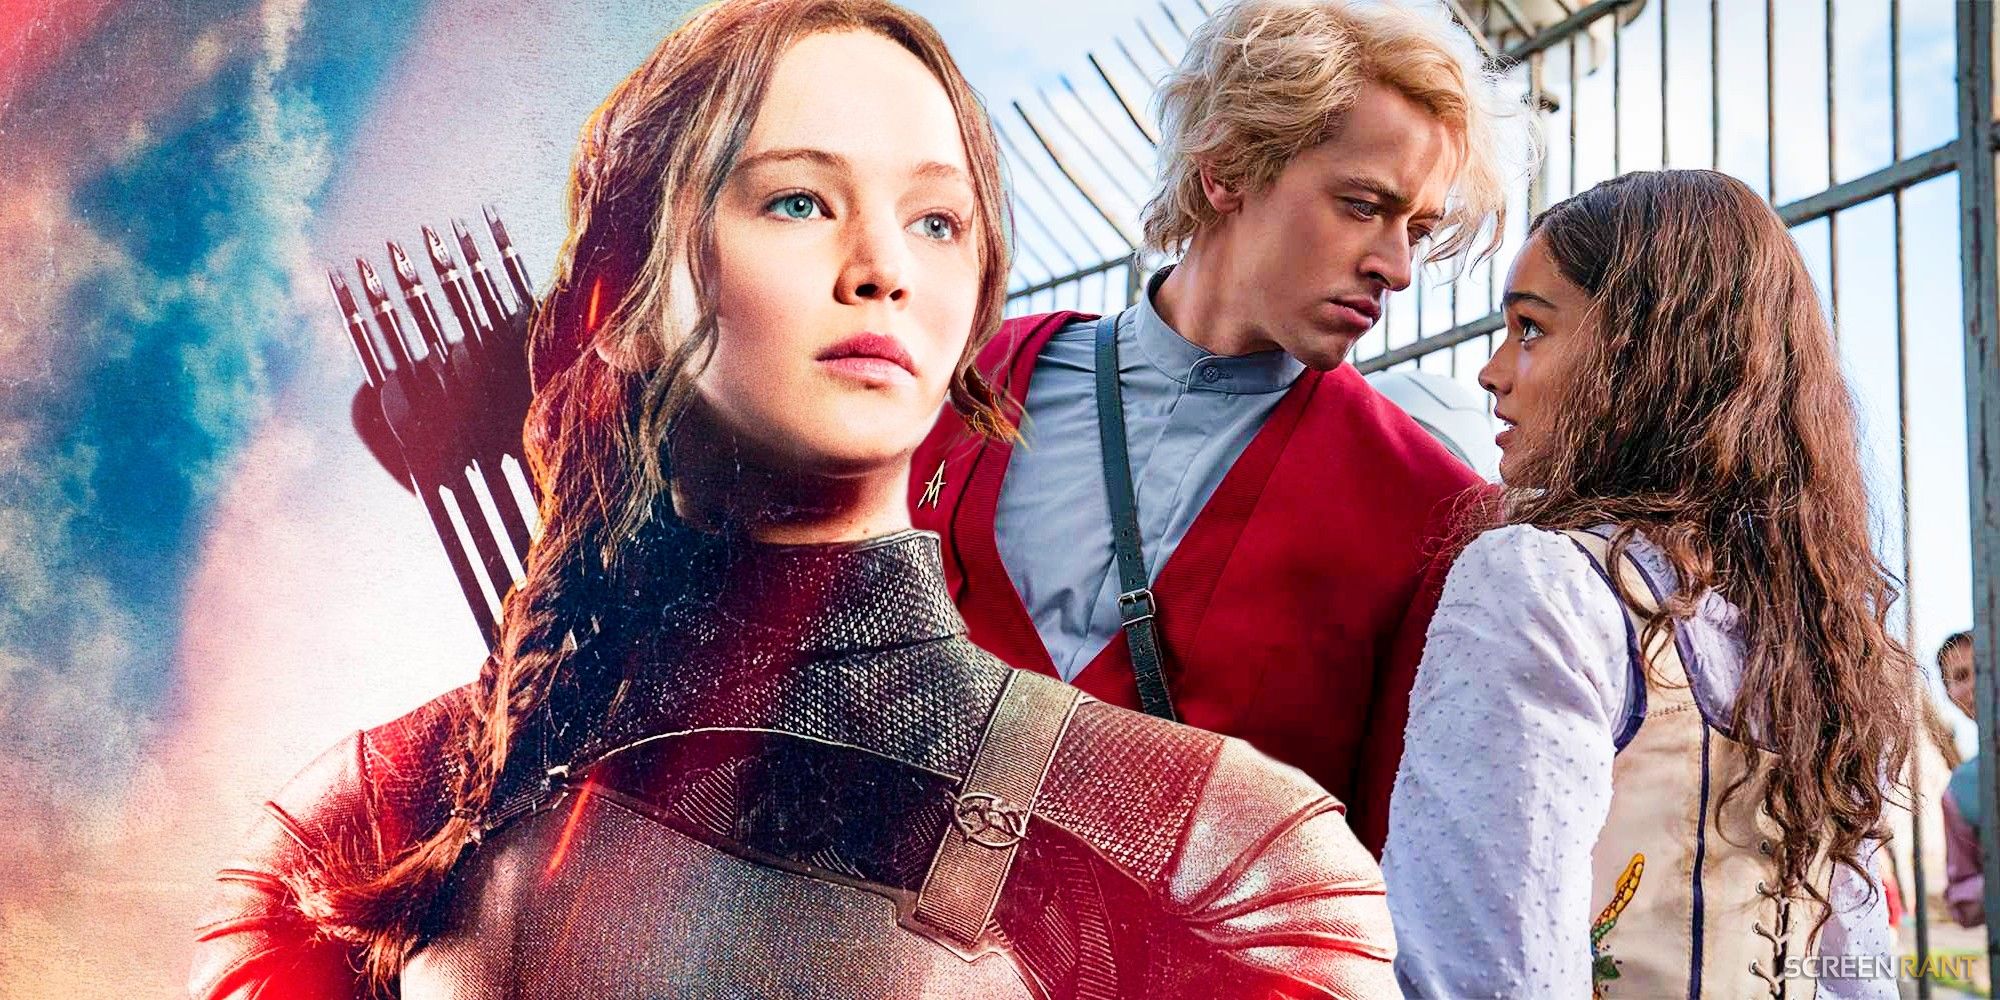 Hunger Games movies order: how to watch the series the right way